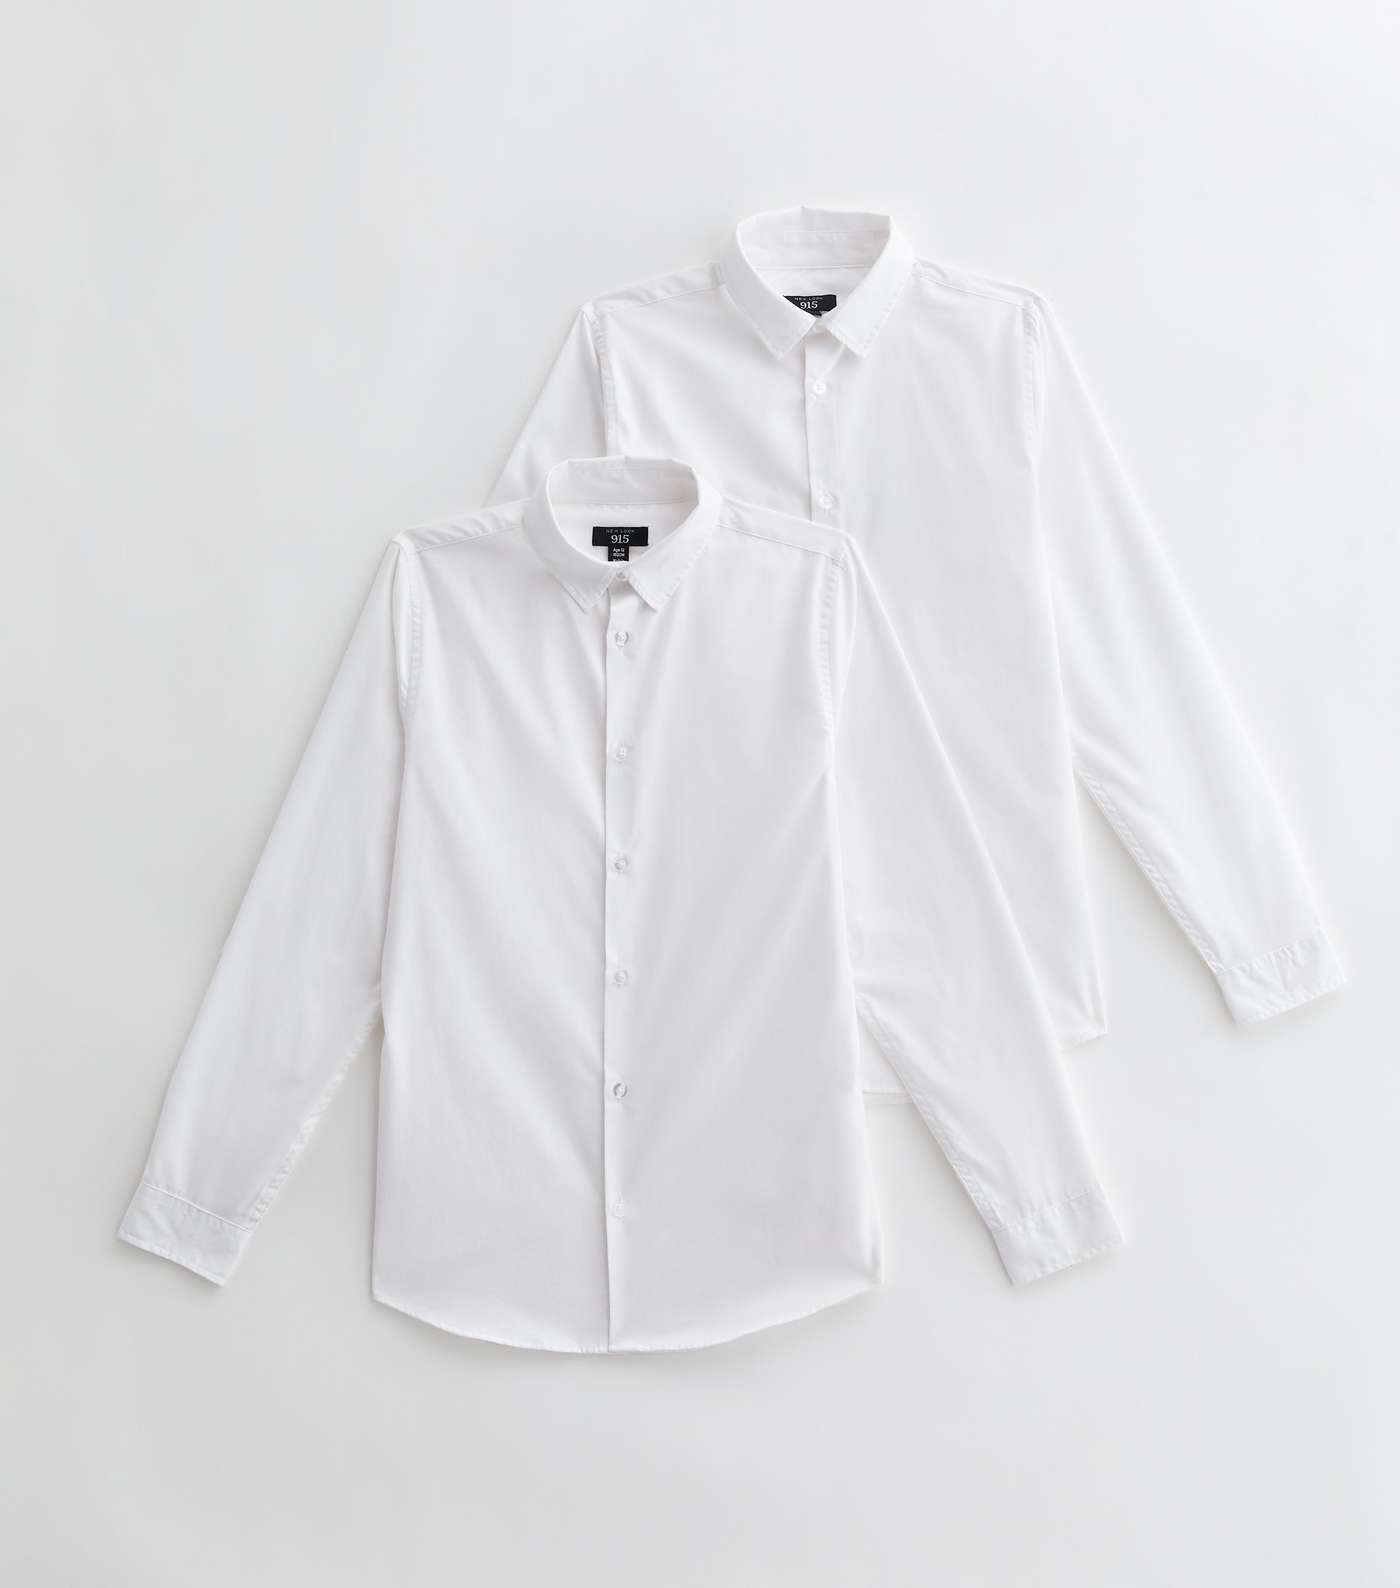 Boys 2 Pack White Long Sleeve Easy Care School Shirts Image 5